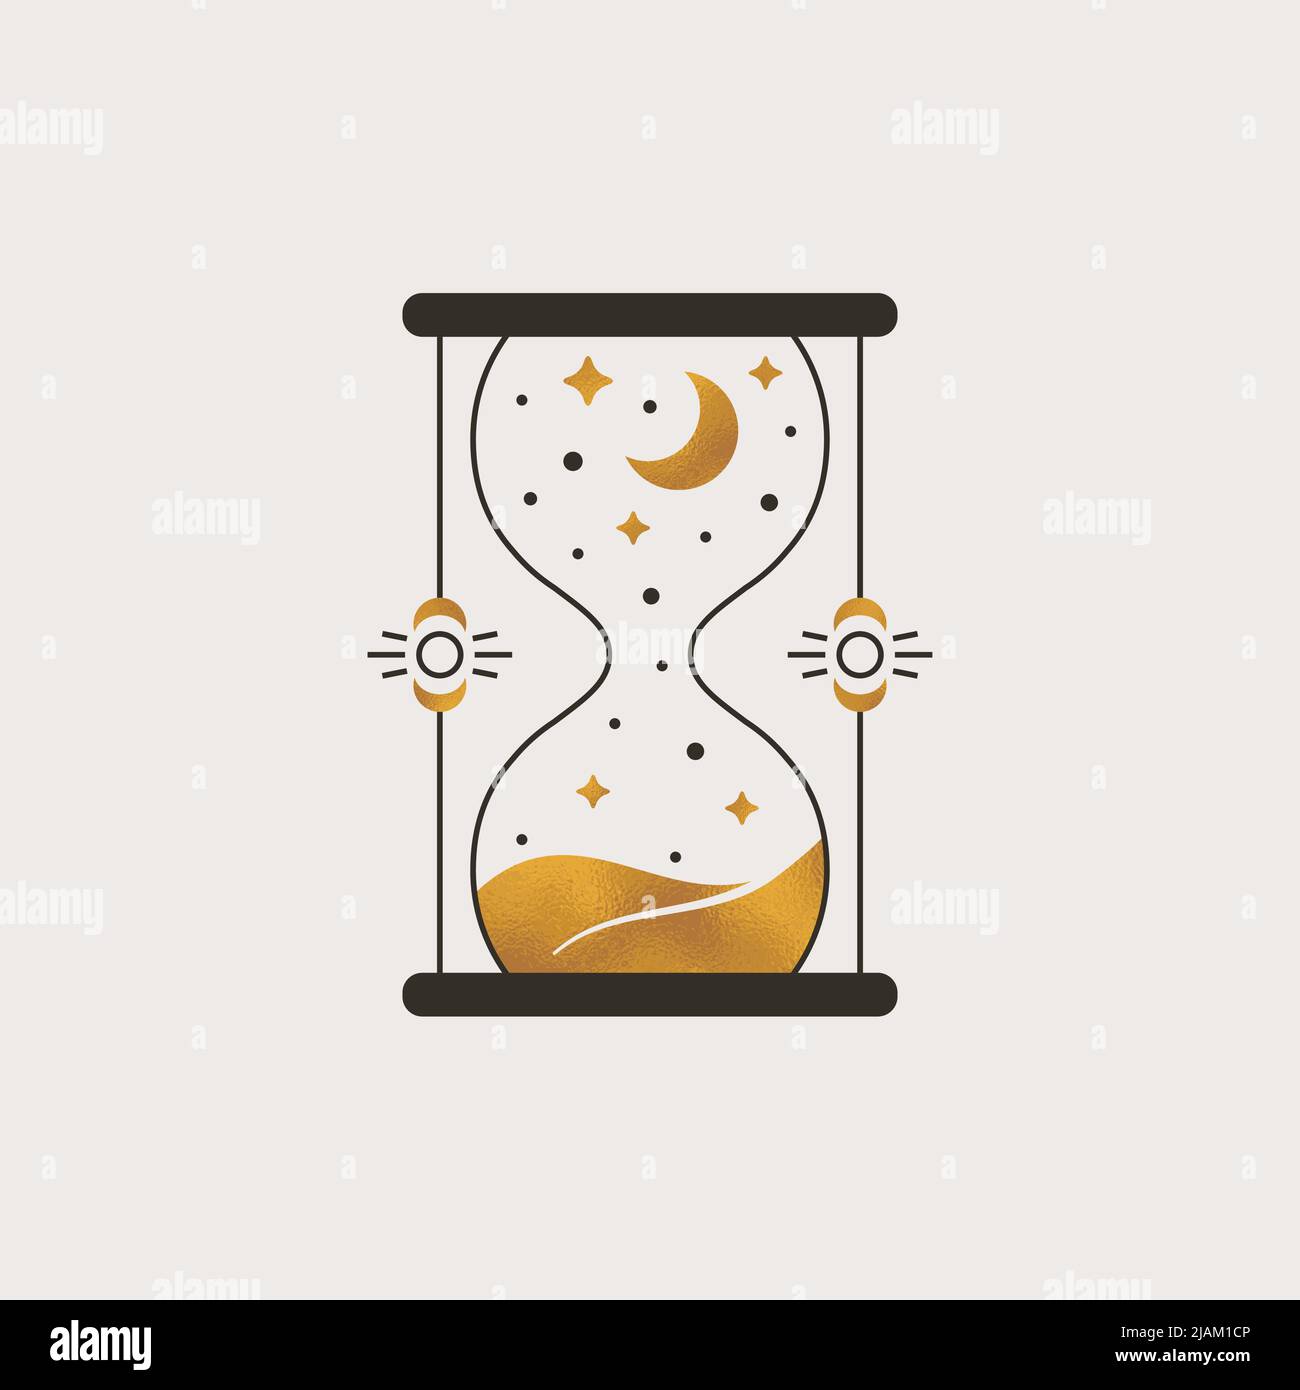 Hourglass logo. Trendy boho illustration with sandglass, moon and stars. Vector isolated esoteric emblem with gold foil texture. Stock Vector